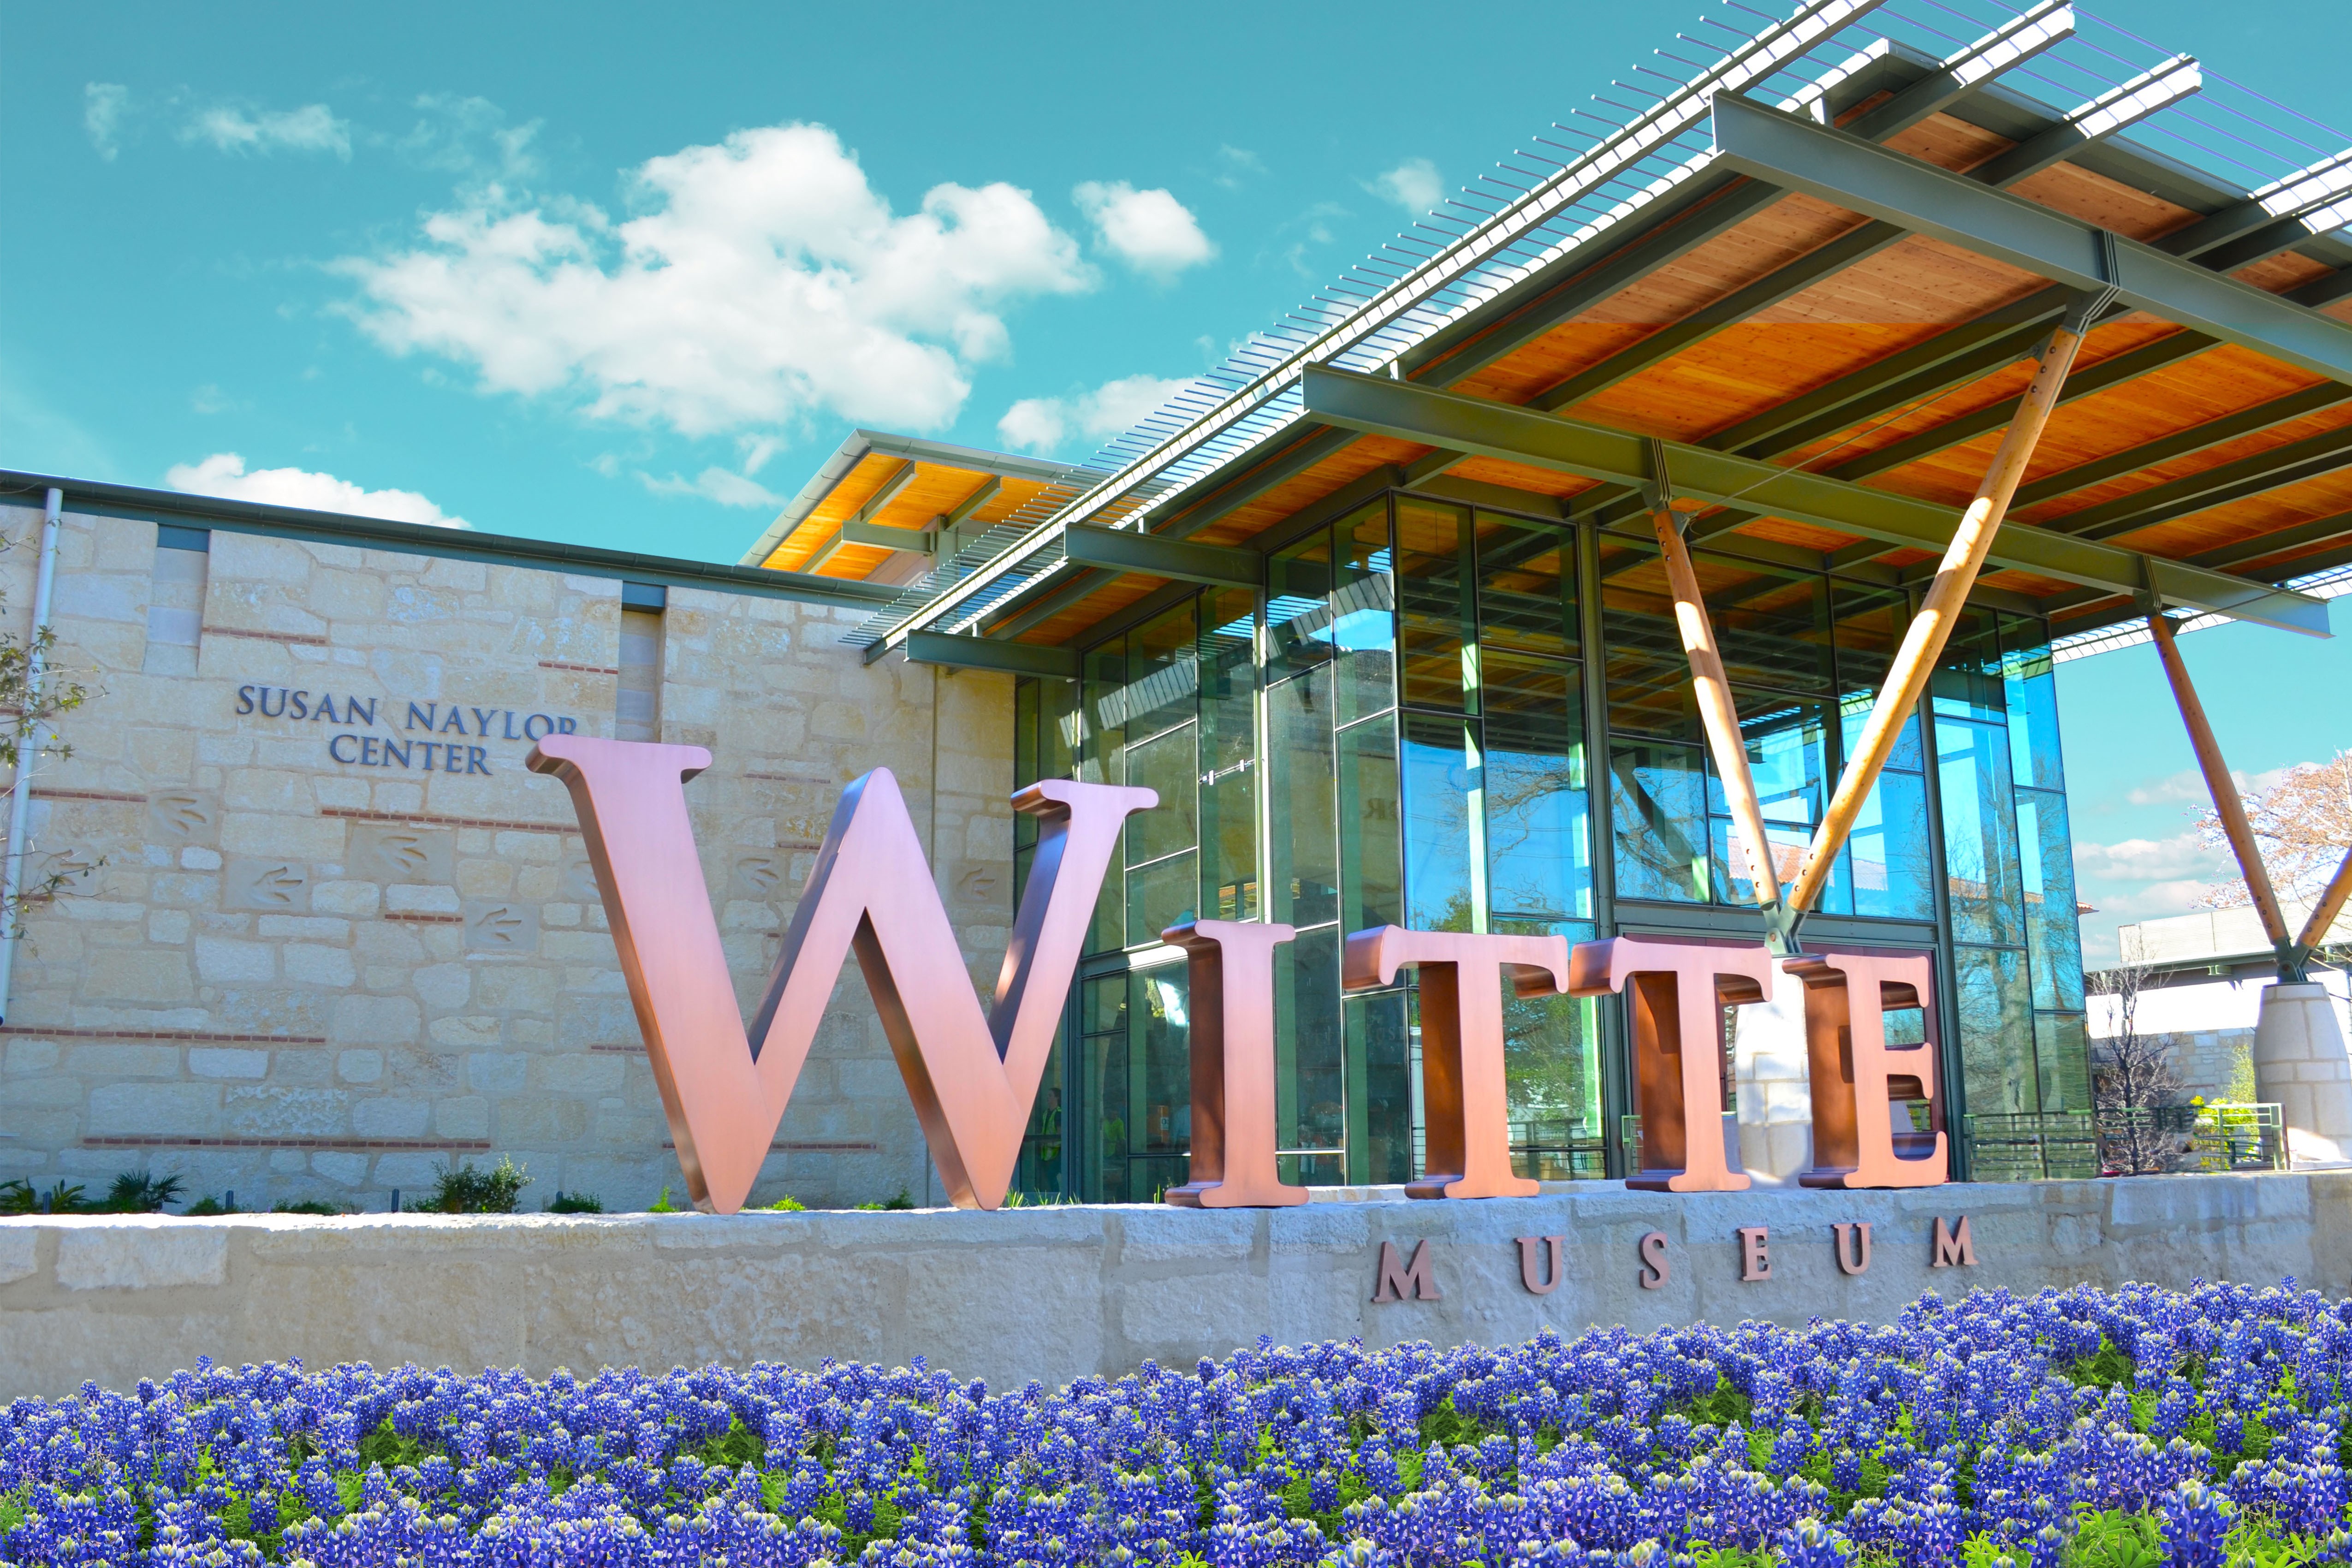 The front of the Witte Museum with bluebonnets blooming on the lawn